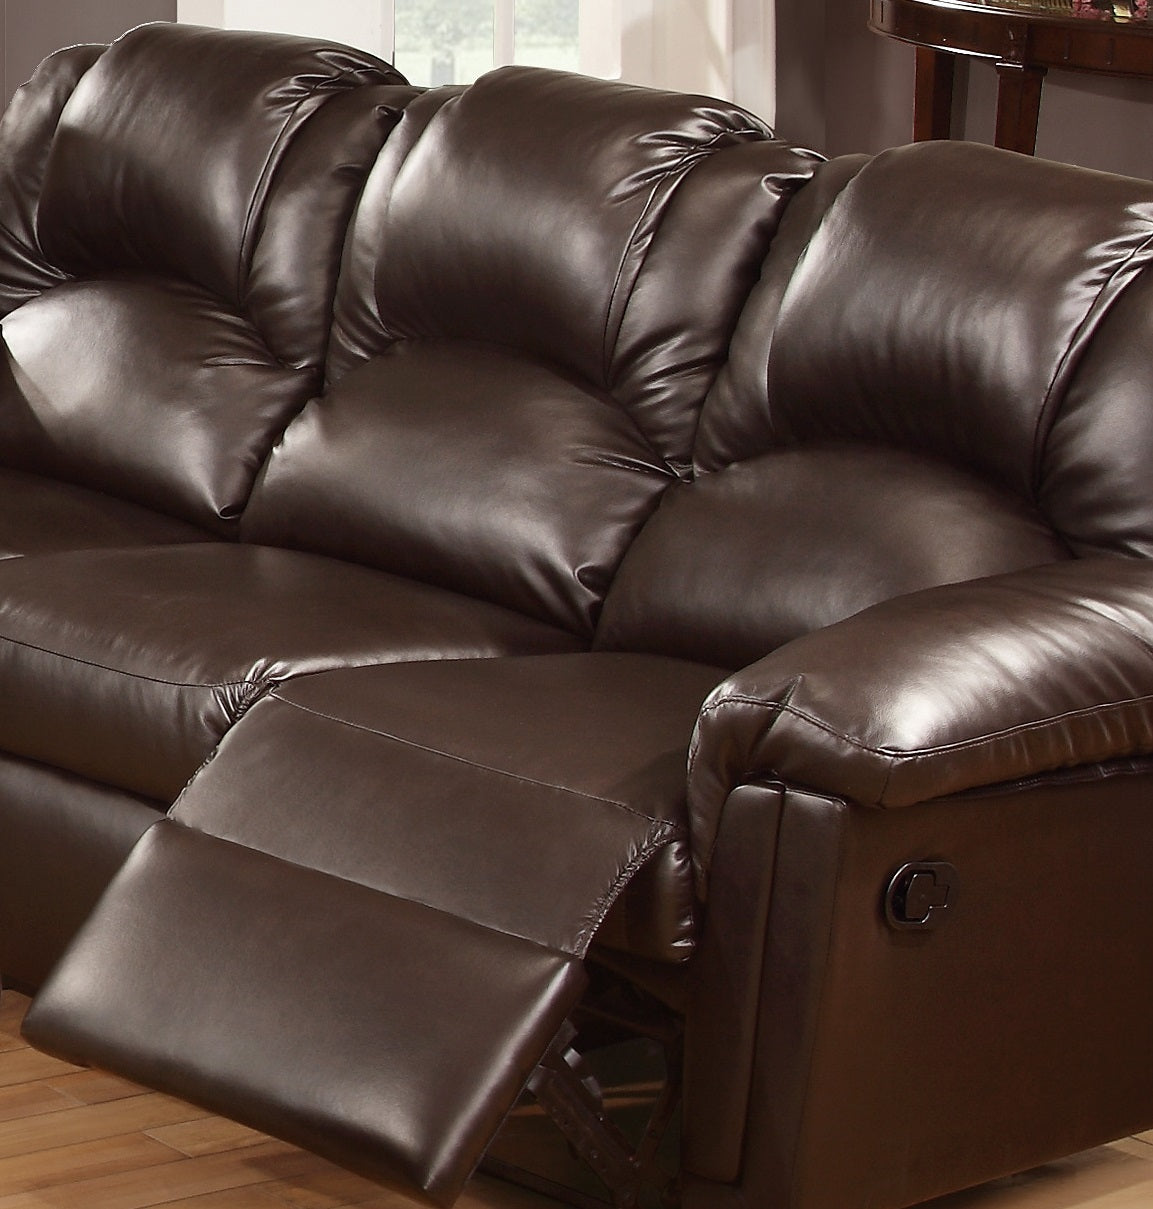 Motion Recliner Chair 1pc Glider Couch Living Room brown-primary living